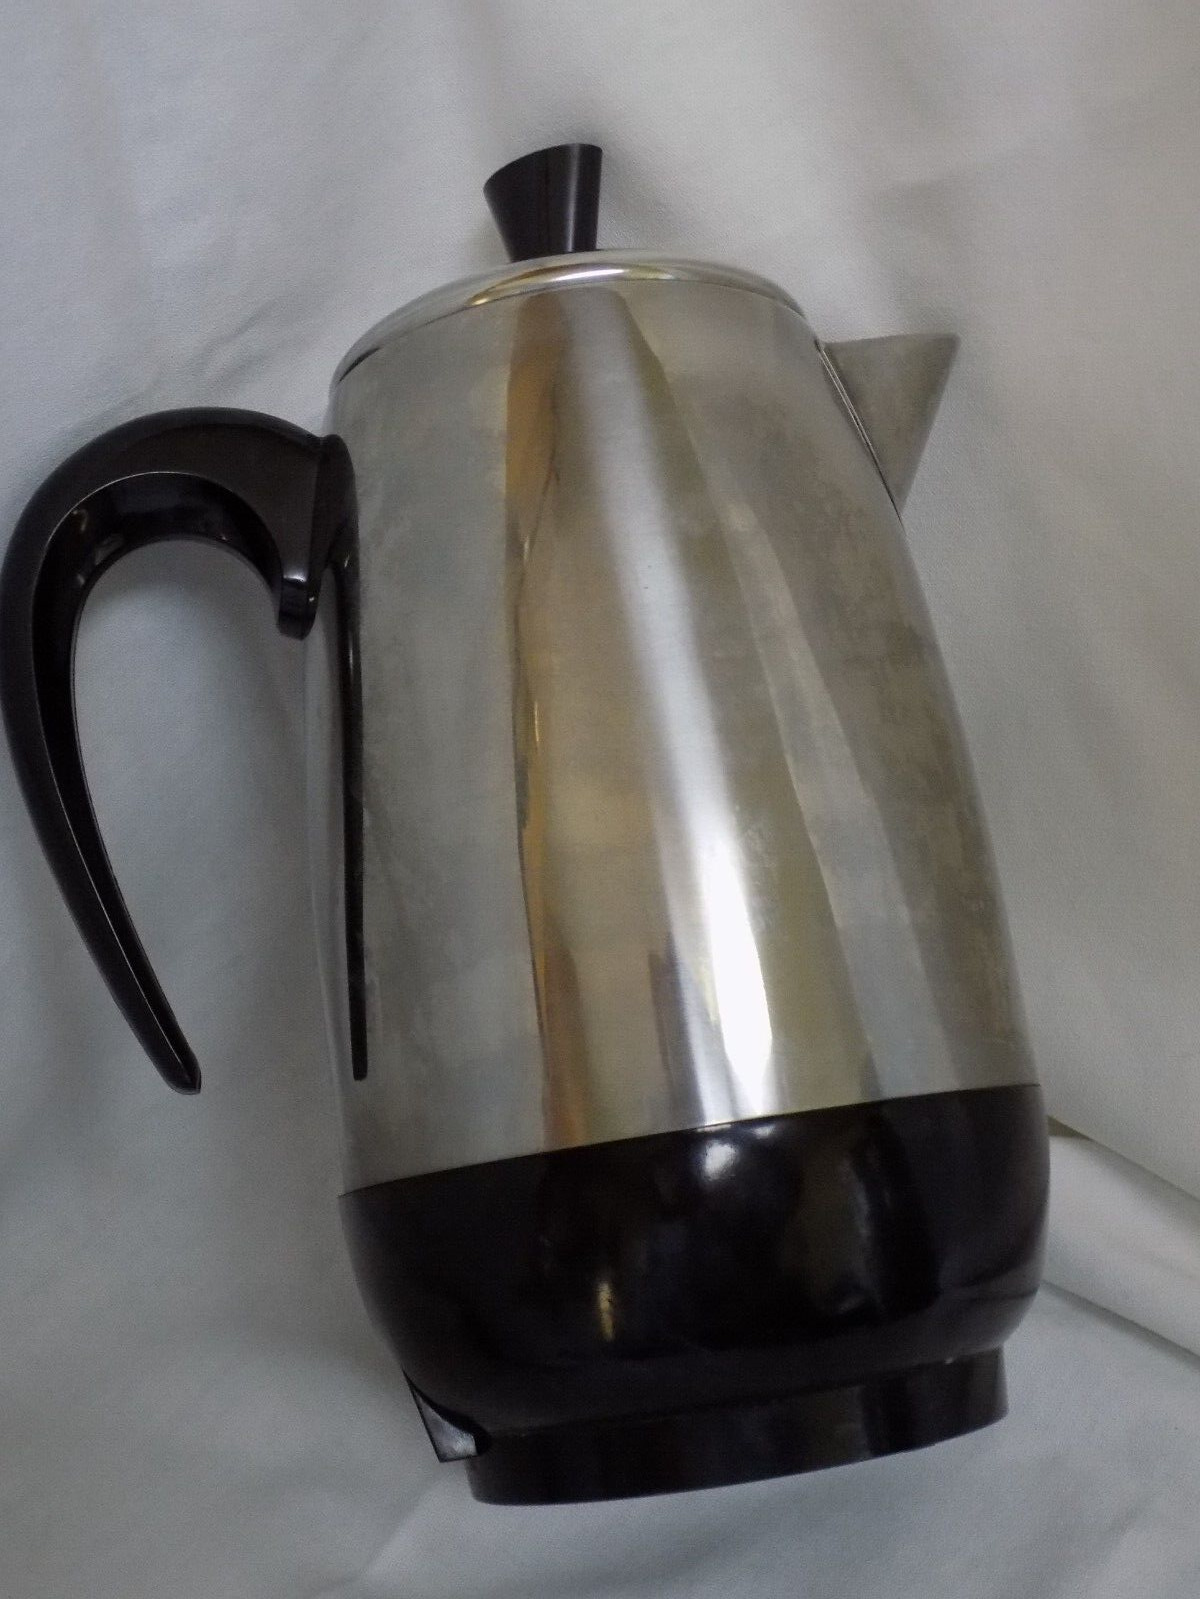 FaberWare SuperFast Fully Automatic 8-Cup Coffee Pot Model MA138B